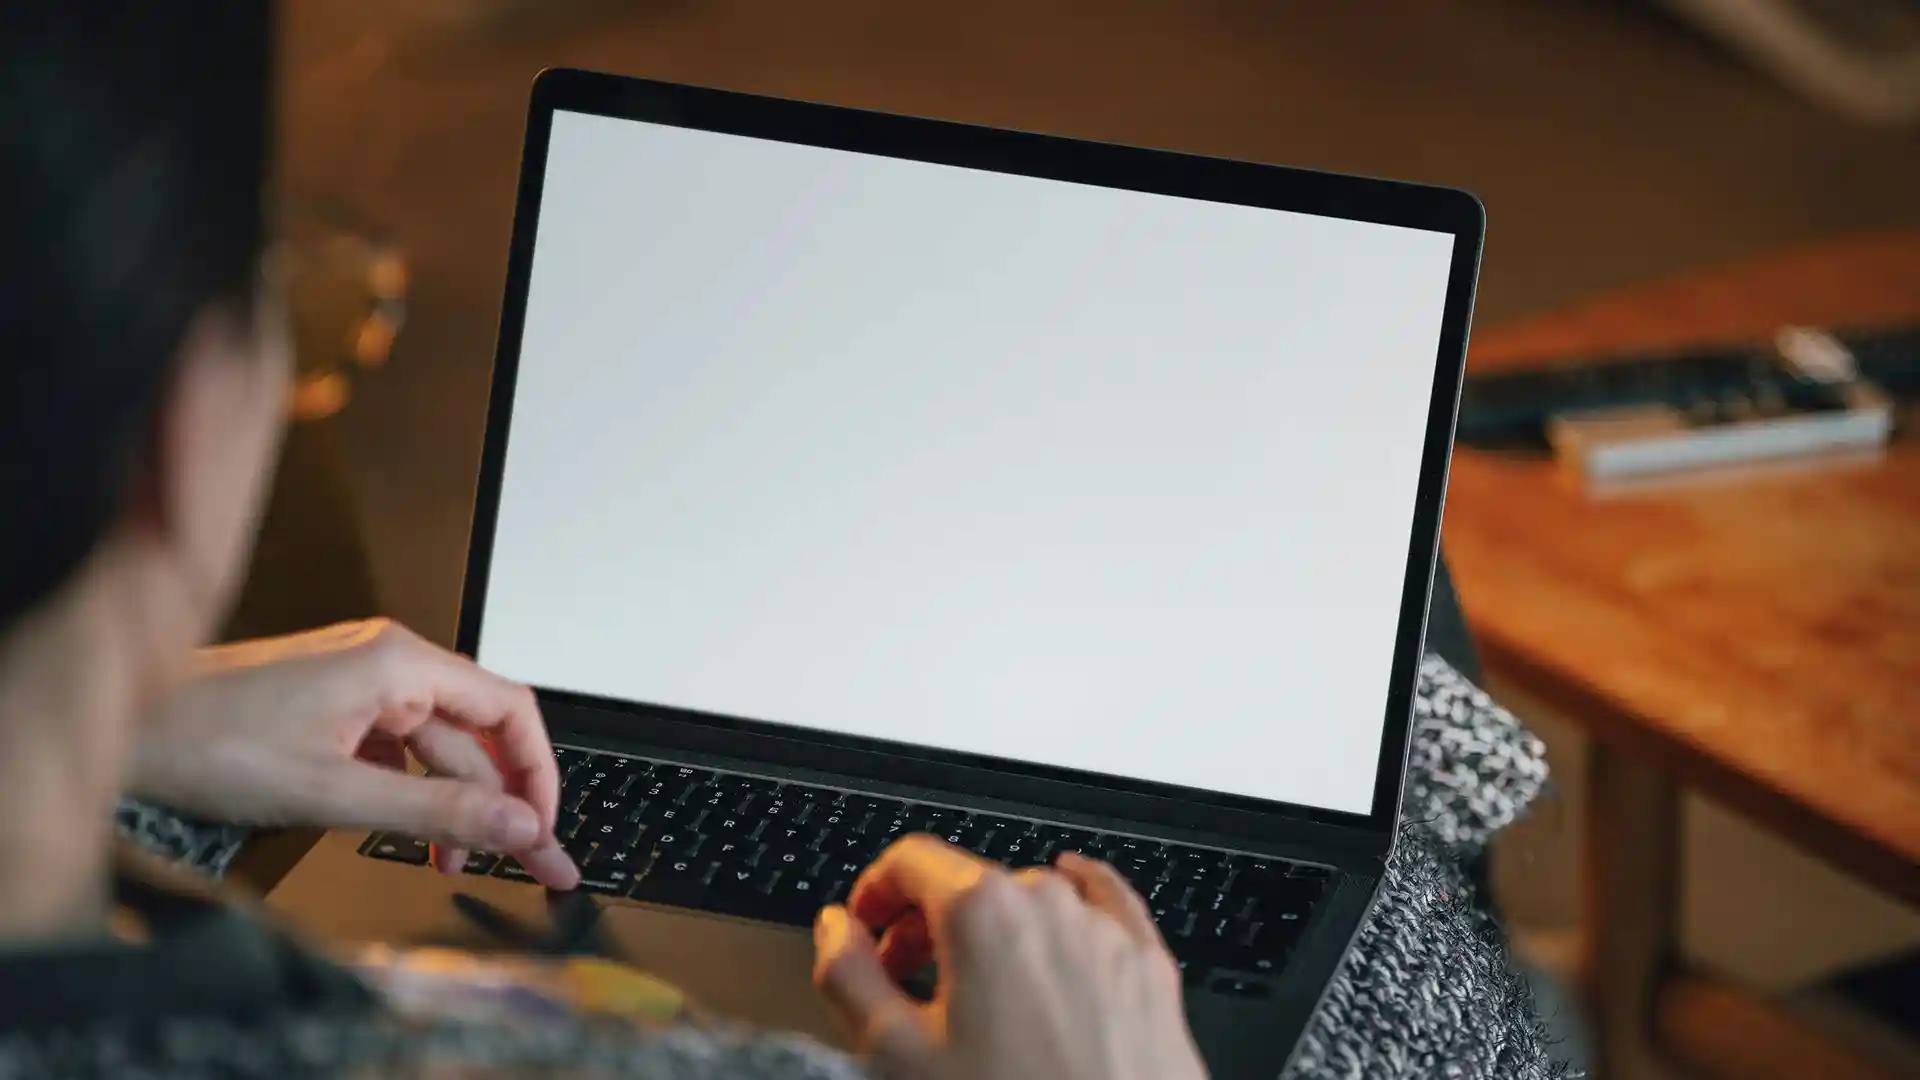 Female person with a laptop on her lap.